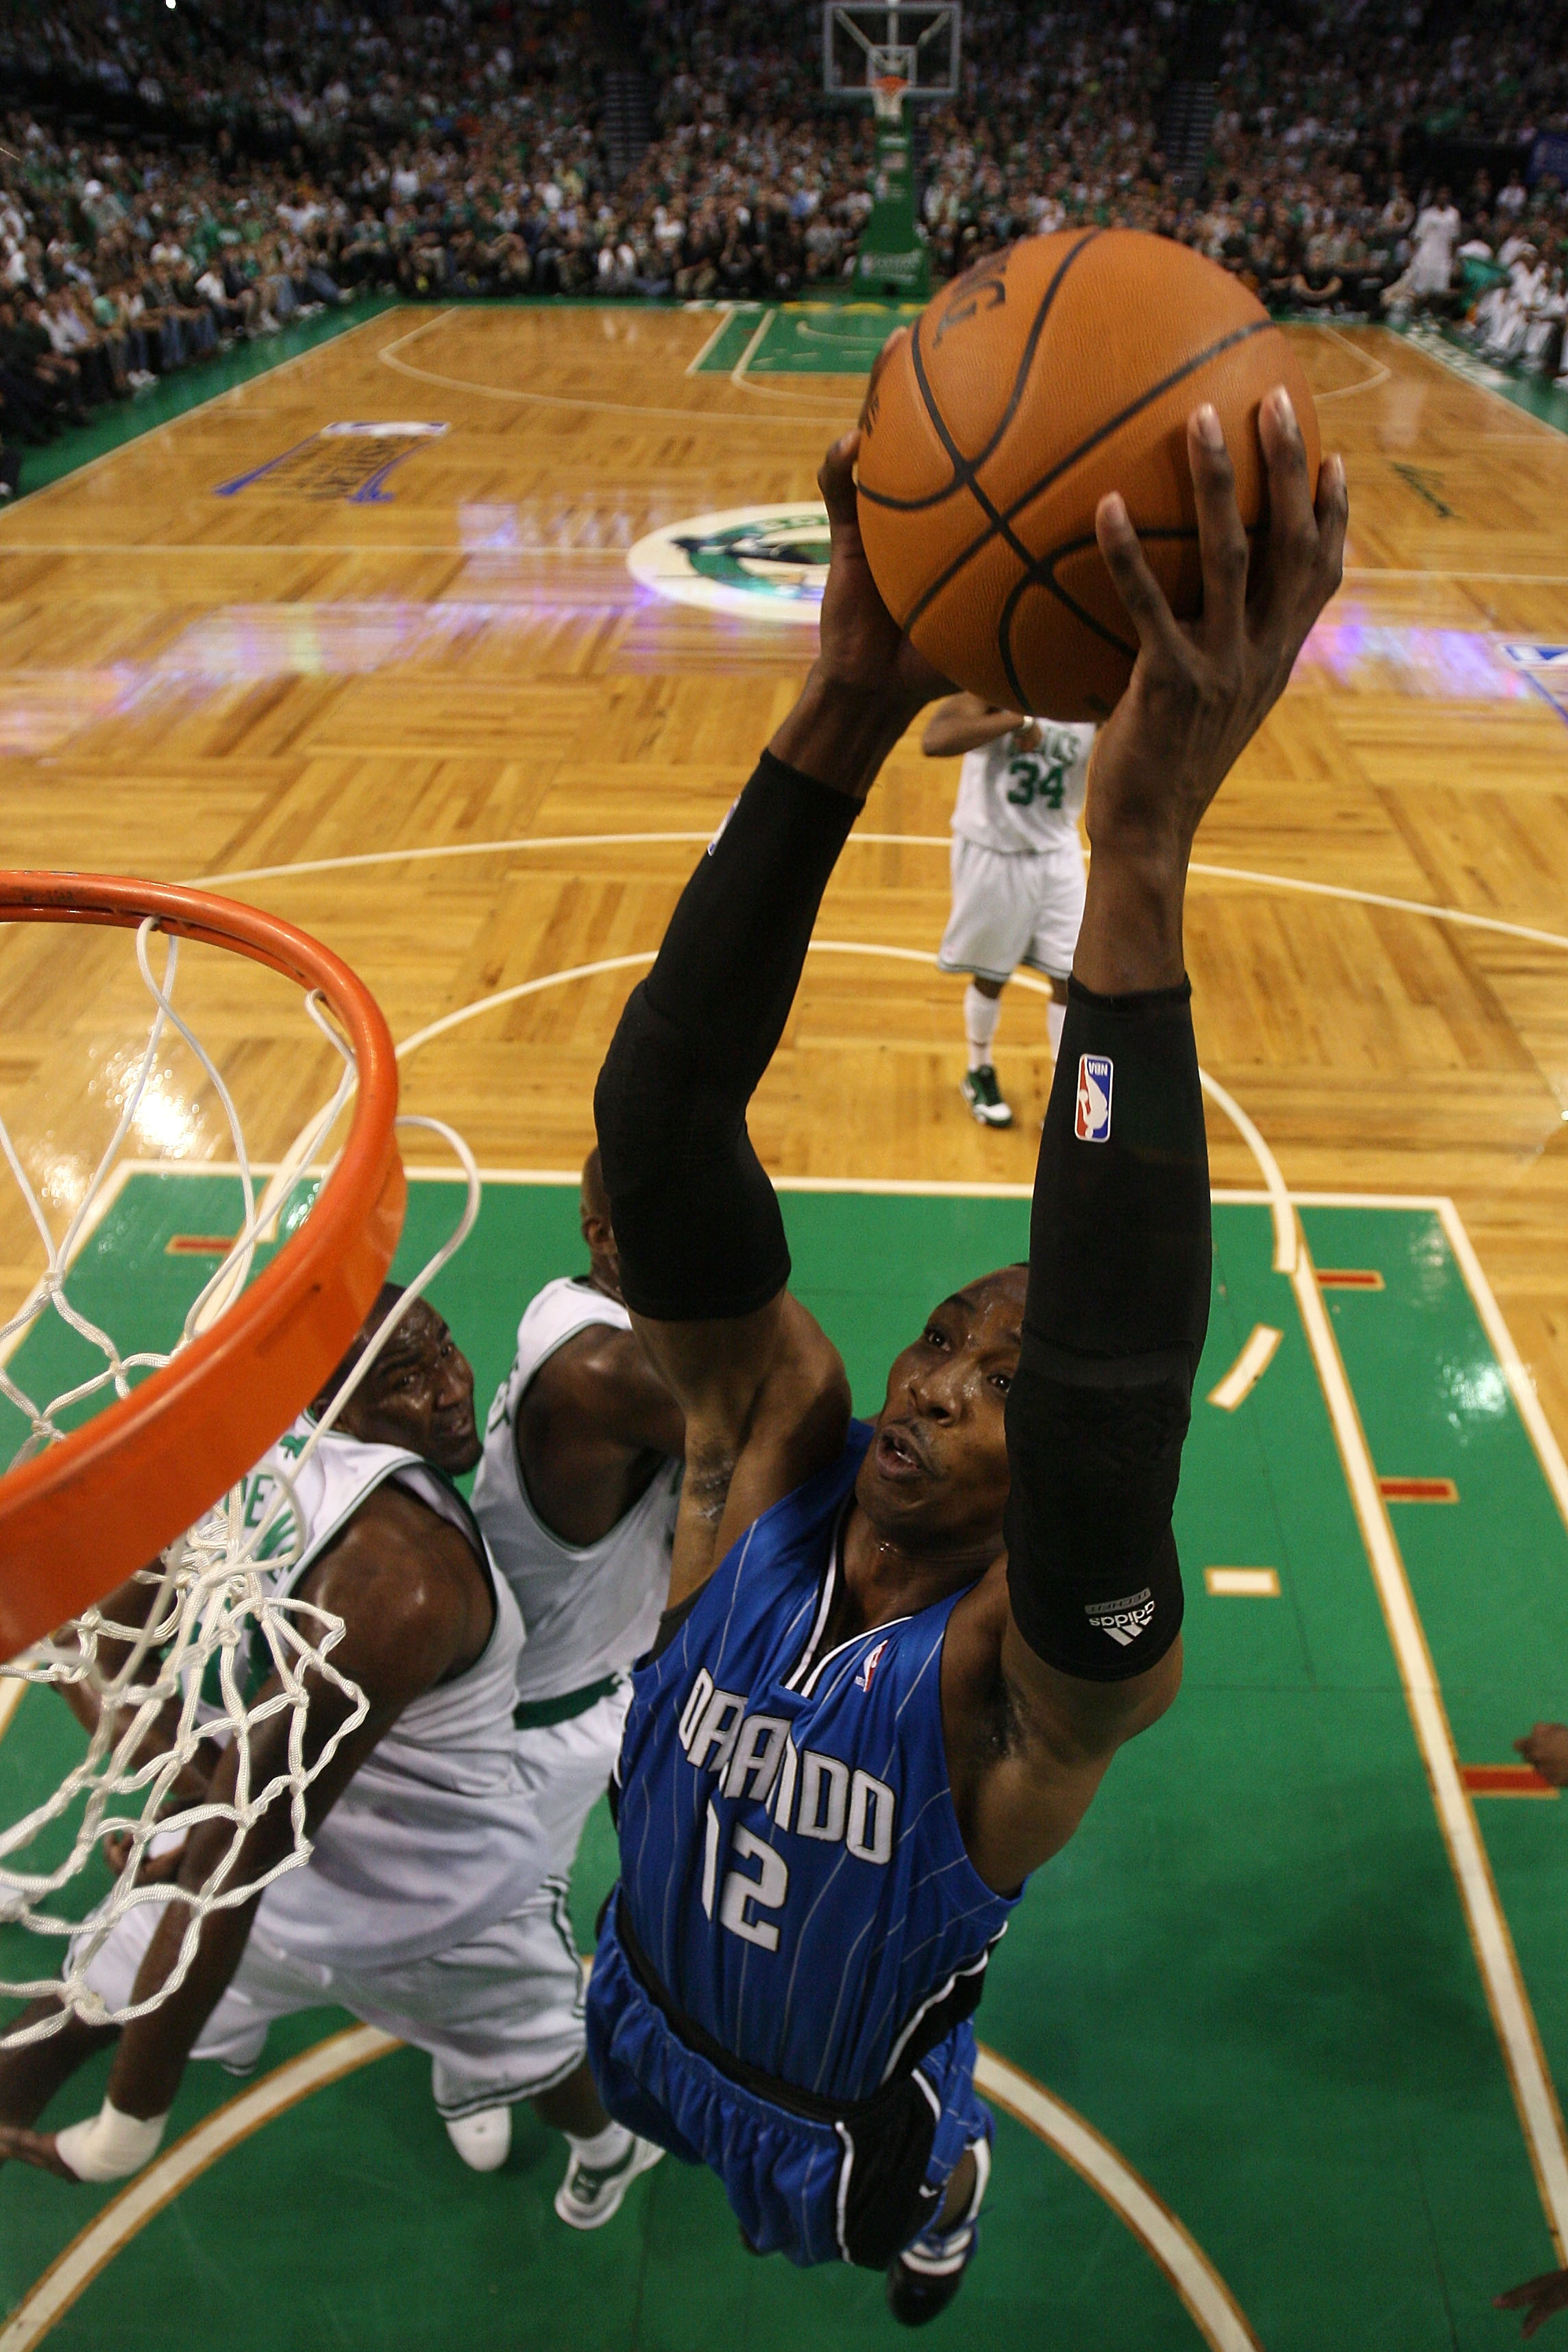 BOSTON - MAY 28:  Dwight Howard #12 of the Orlando Magic dunks against the Boston Celtics in Game Six of the Eastern Conference Finals during the 2010 NBA Playoffs at TD Garden on May 28, 2010 in Boston, Massachusetts.  NOTE TO USER: User expressly acknow